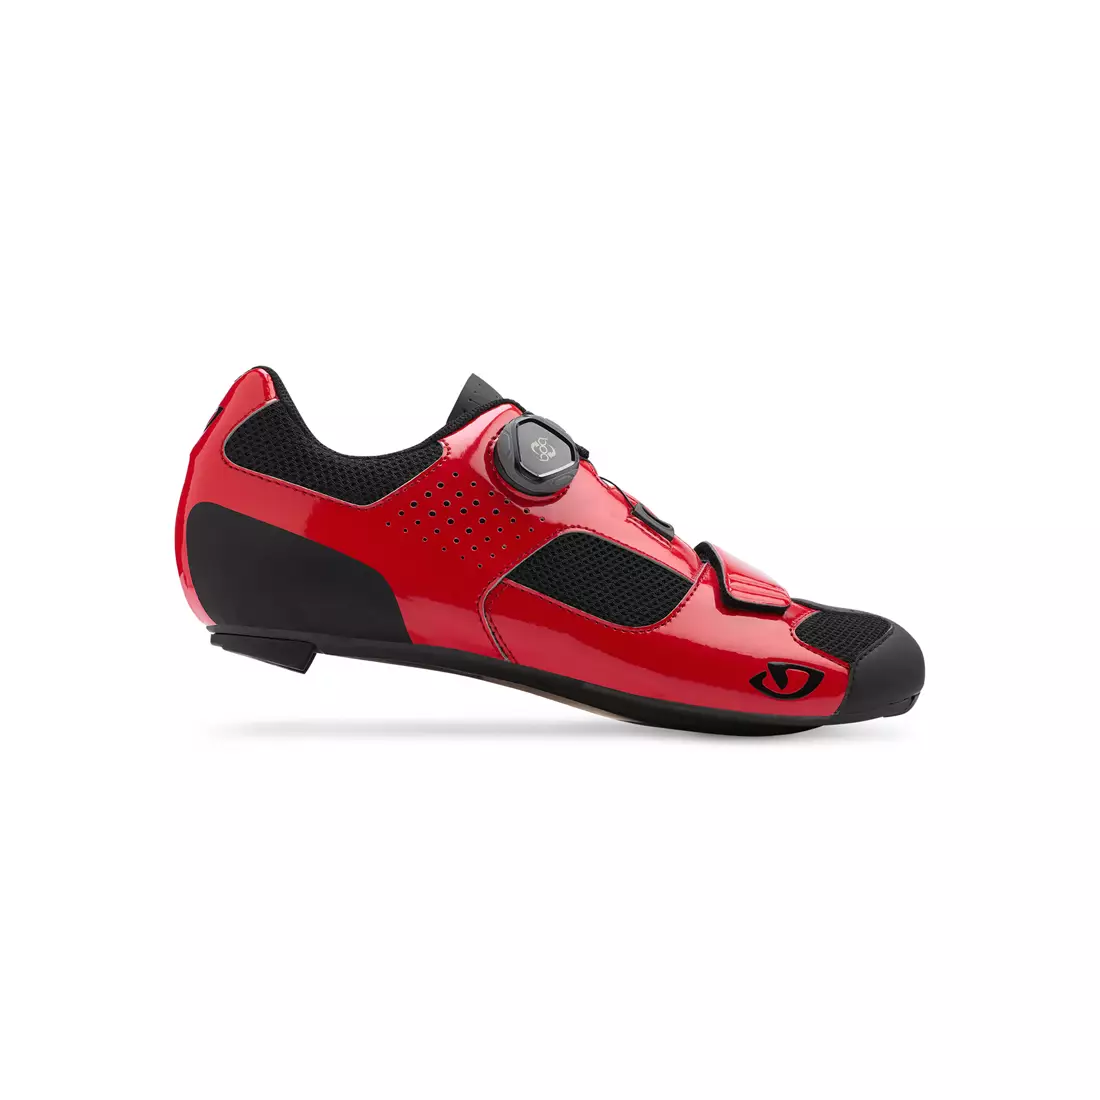 Men's bicycle boots GIRO TRANS BOA bright red black 